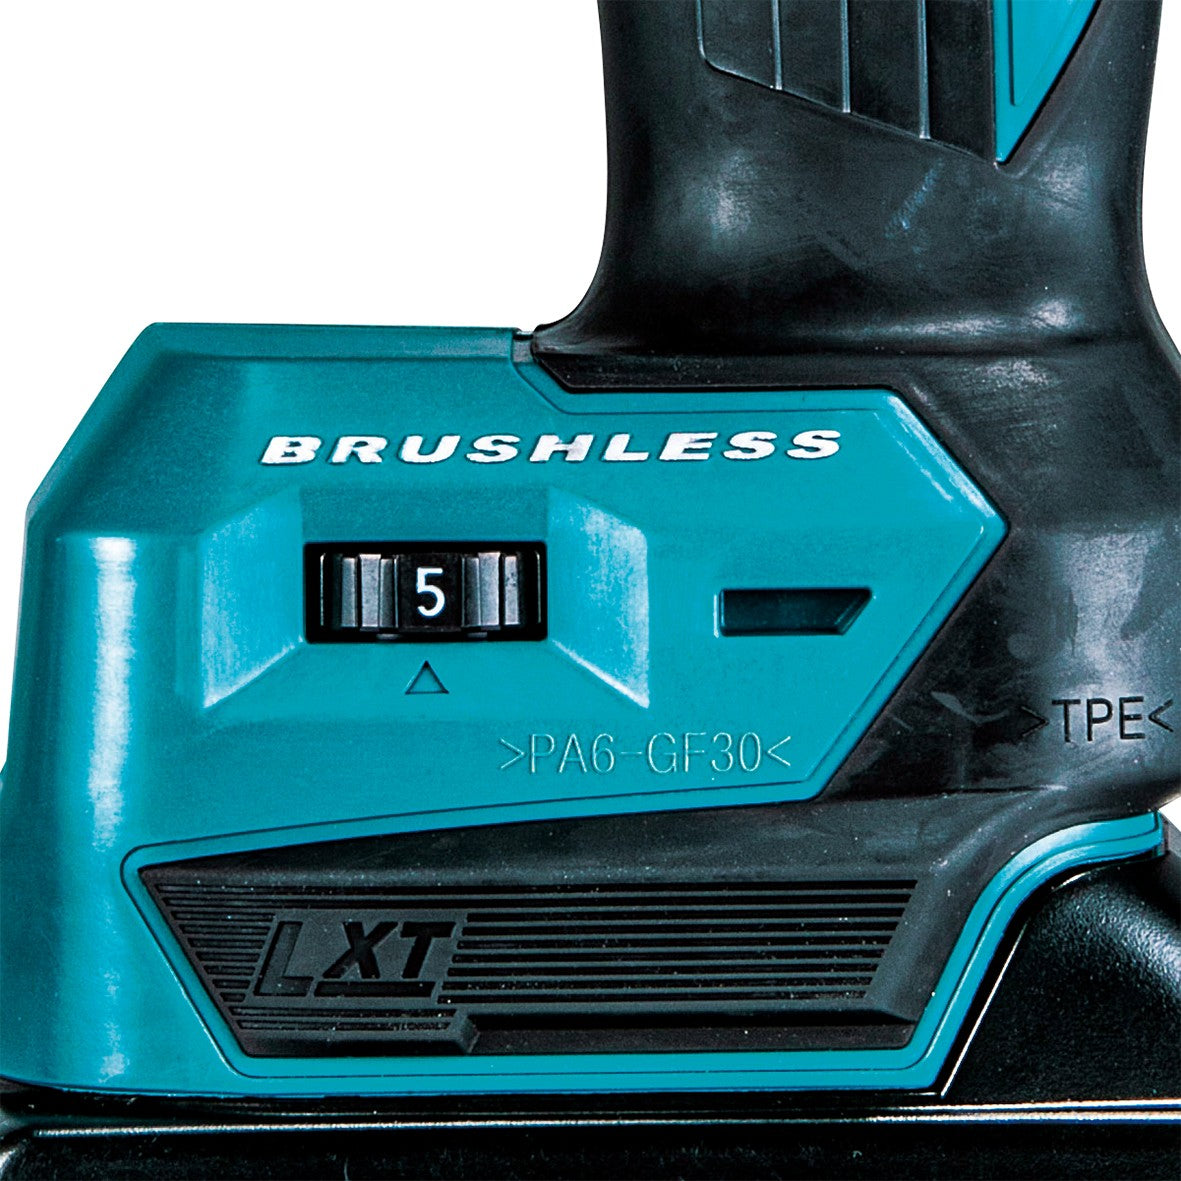 18V Brushless 9mm Power File Bare (Tool Only) DBS180Z by Makita